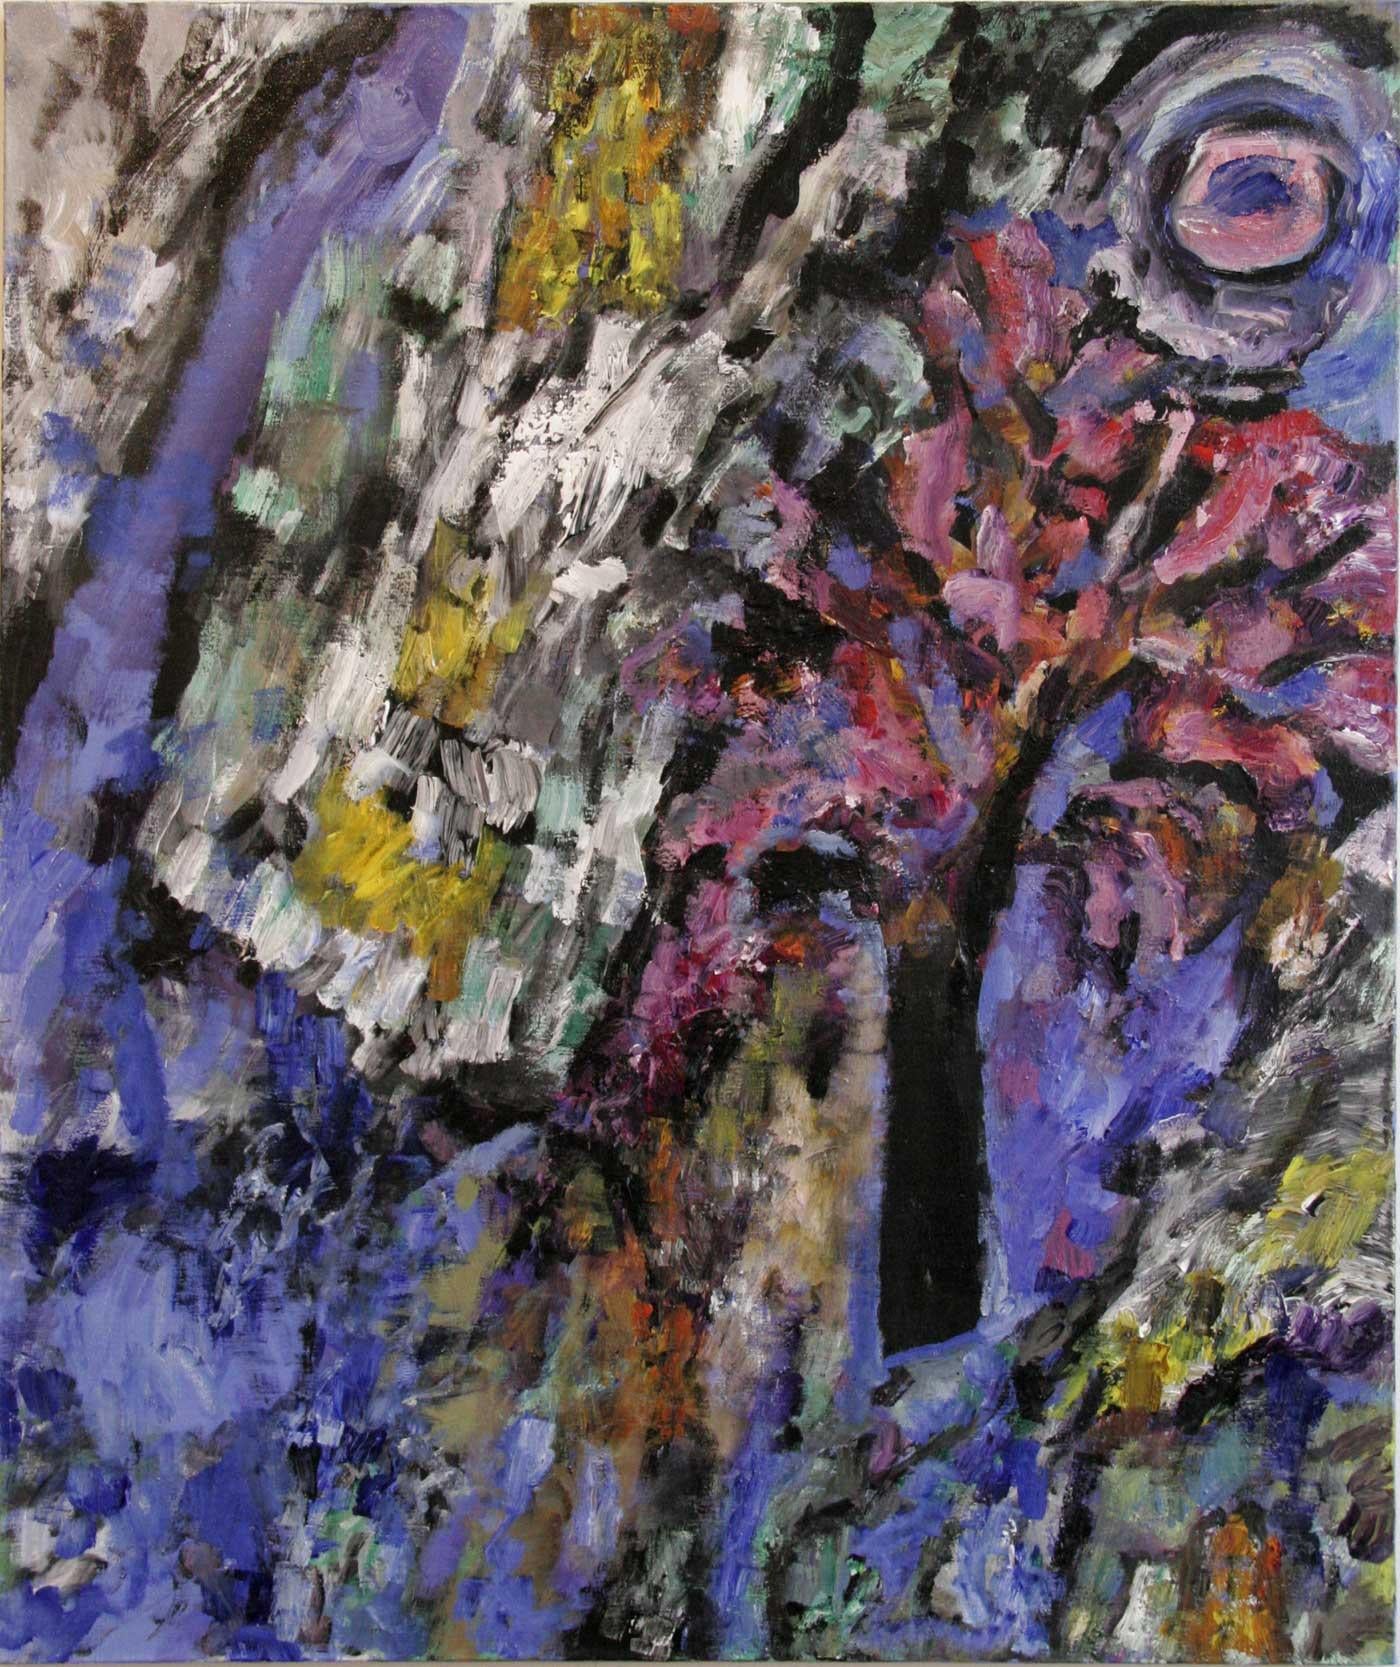 Purple Tree - abstract impressionist, figurative oil on linen, rich bold colors - Painting by Toni Franovic